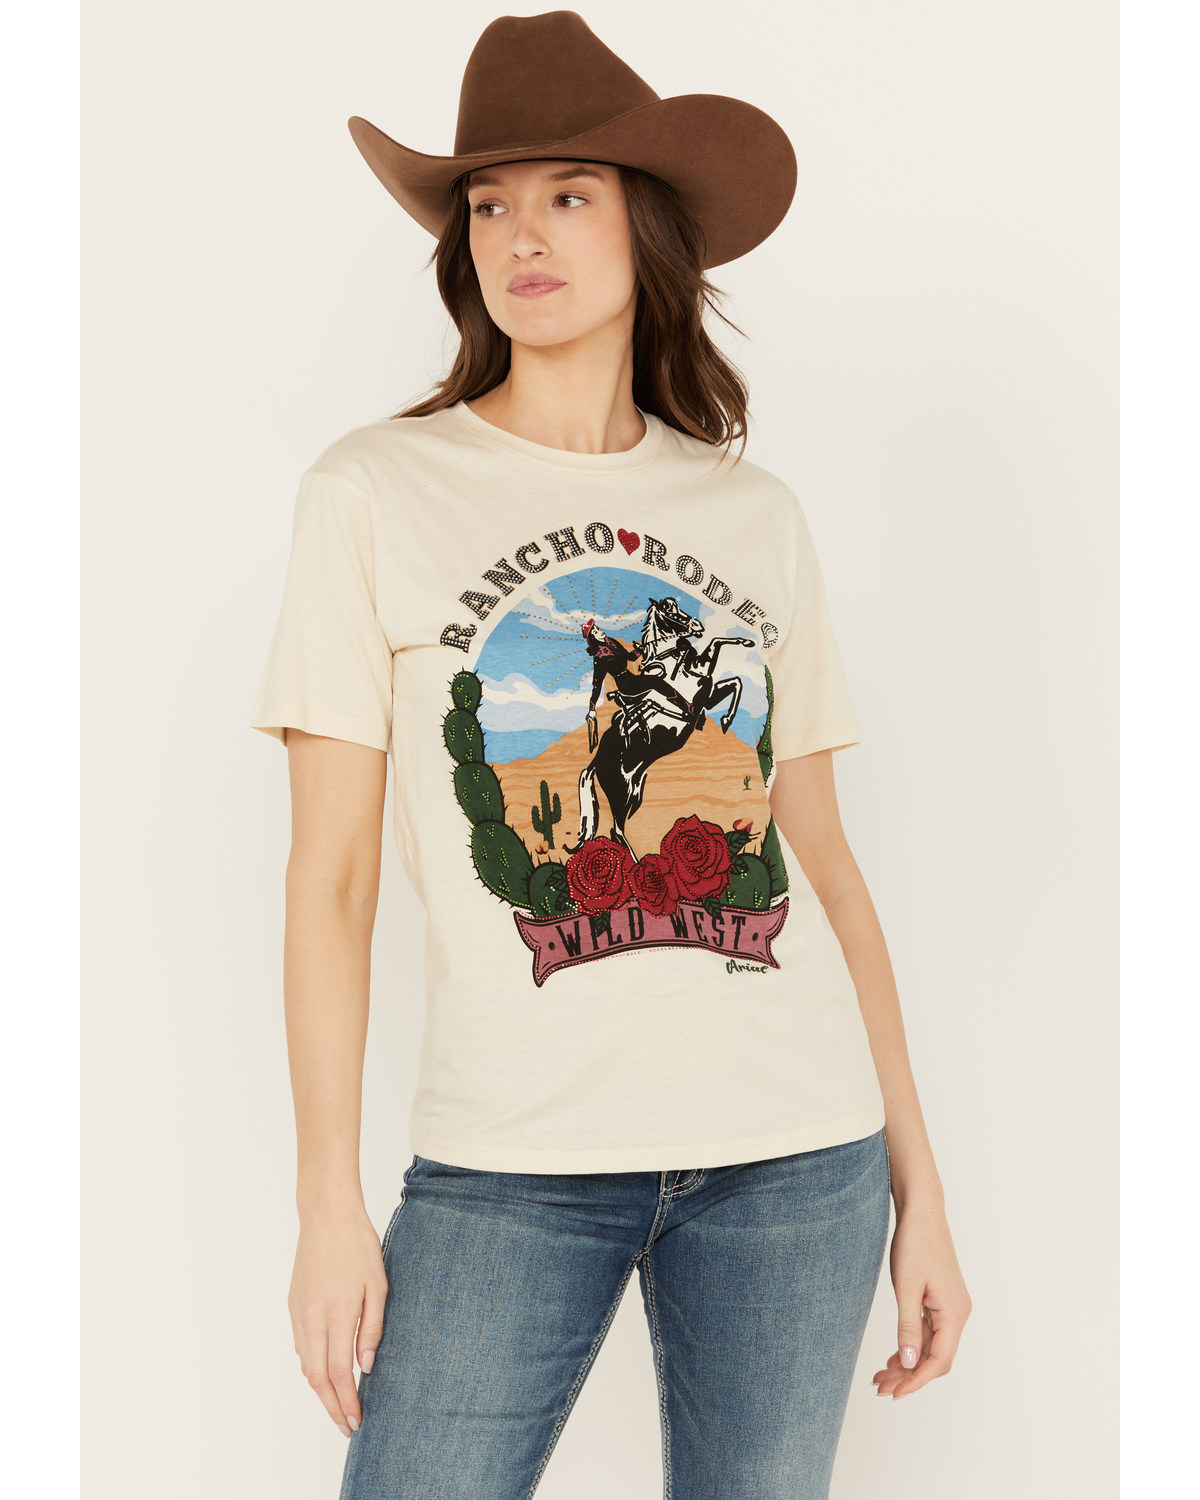 Ariat Women's Embellished Ranch Rodeo Short Sleeve Graphic Tee